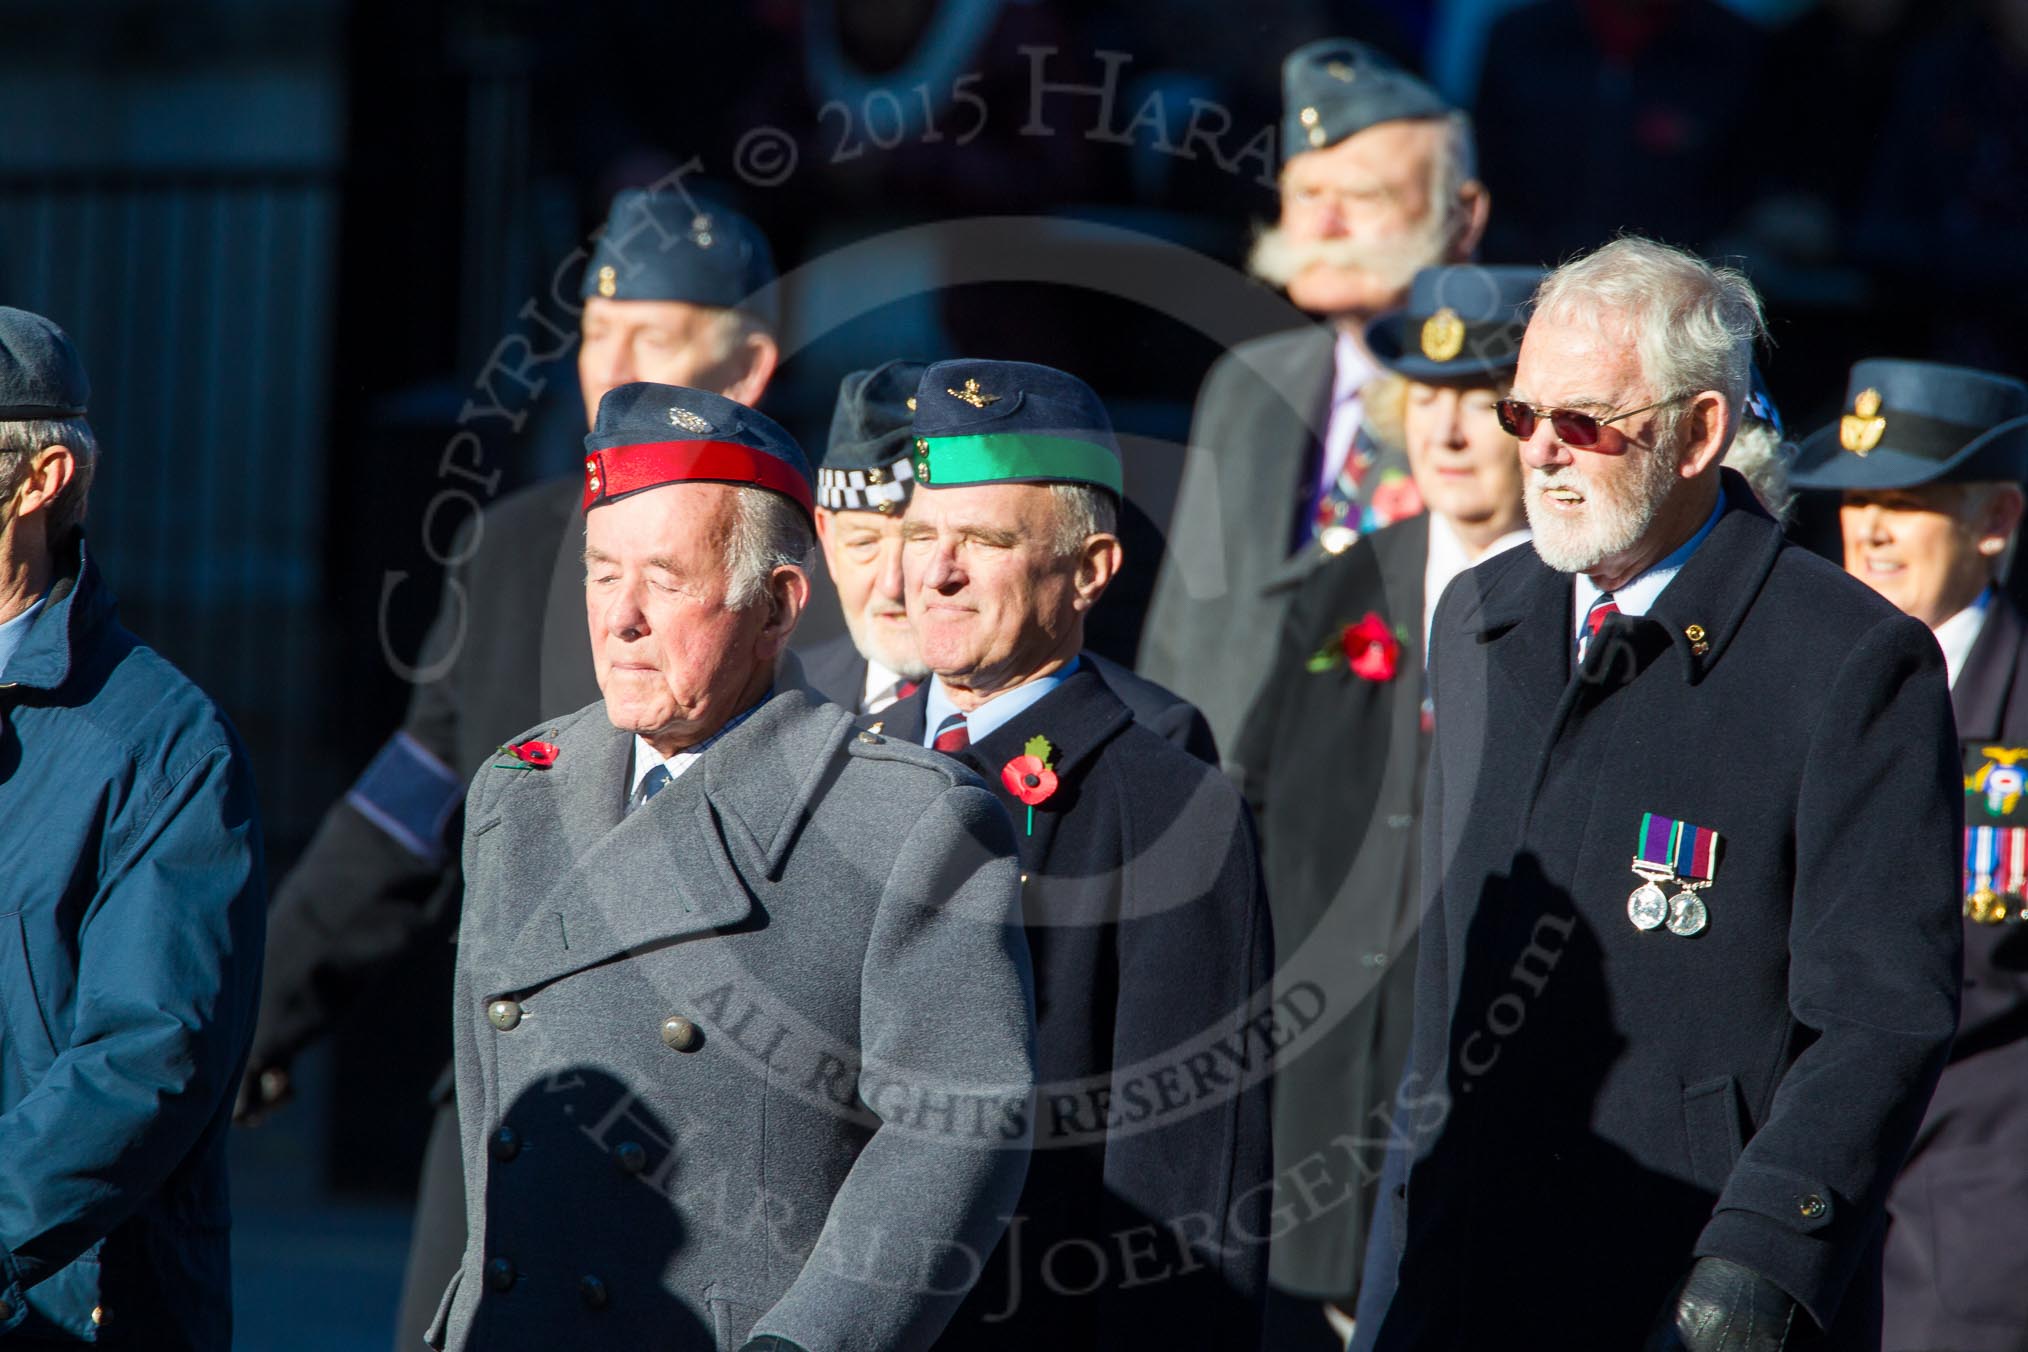 Remembrance Sunday Cenotaph March Past 2013: C4 - Federation of Royal Air Force Apprentice & Boy Entrant Associations..
Press stand opposite the Foreign Office building, Whitehall, London SW1,
London,
Greater London,
United Kingdom,
on 10 November 2013 at 12:06, image #1711